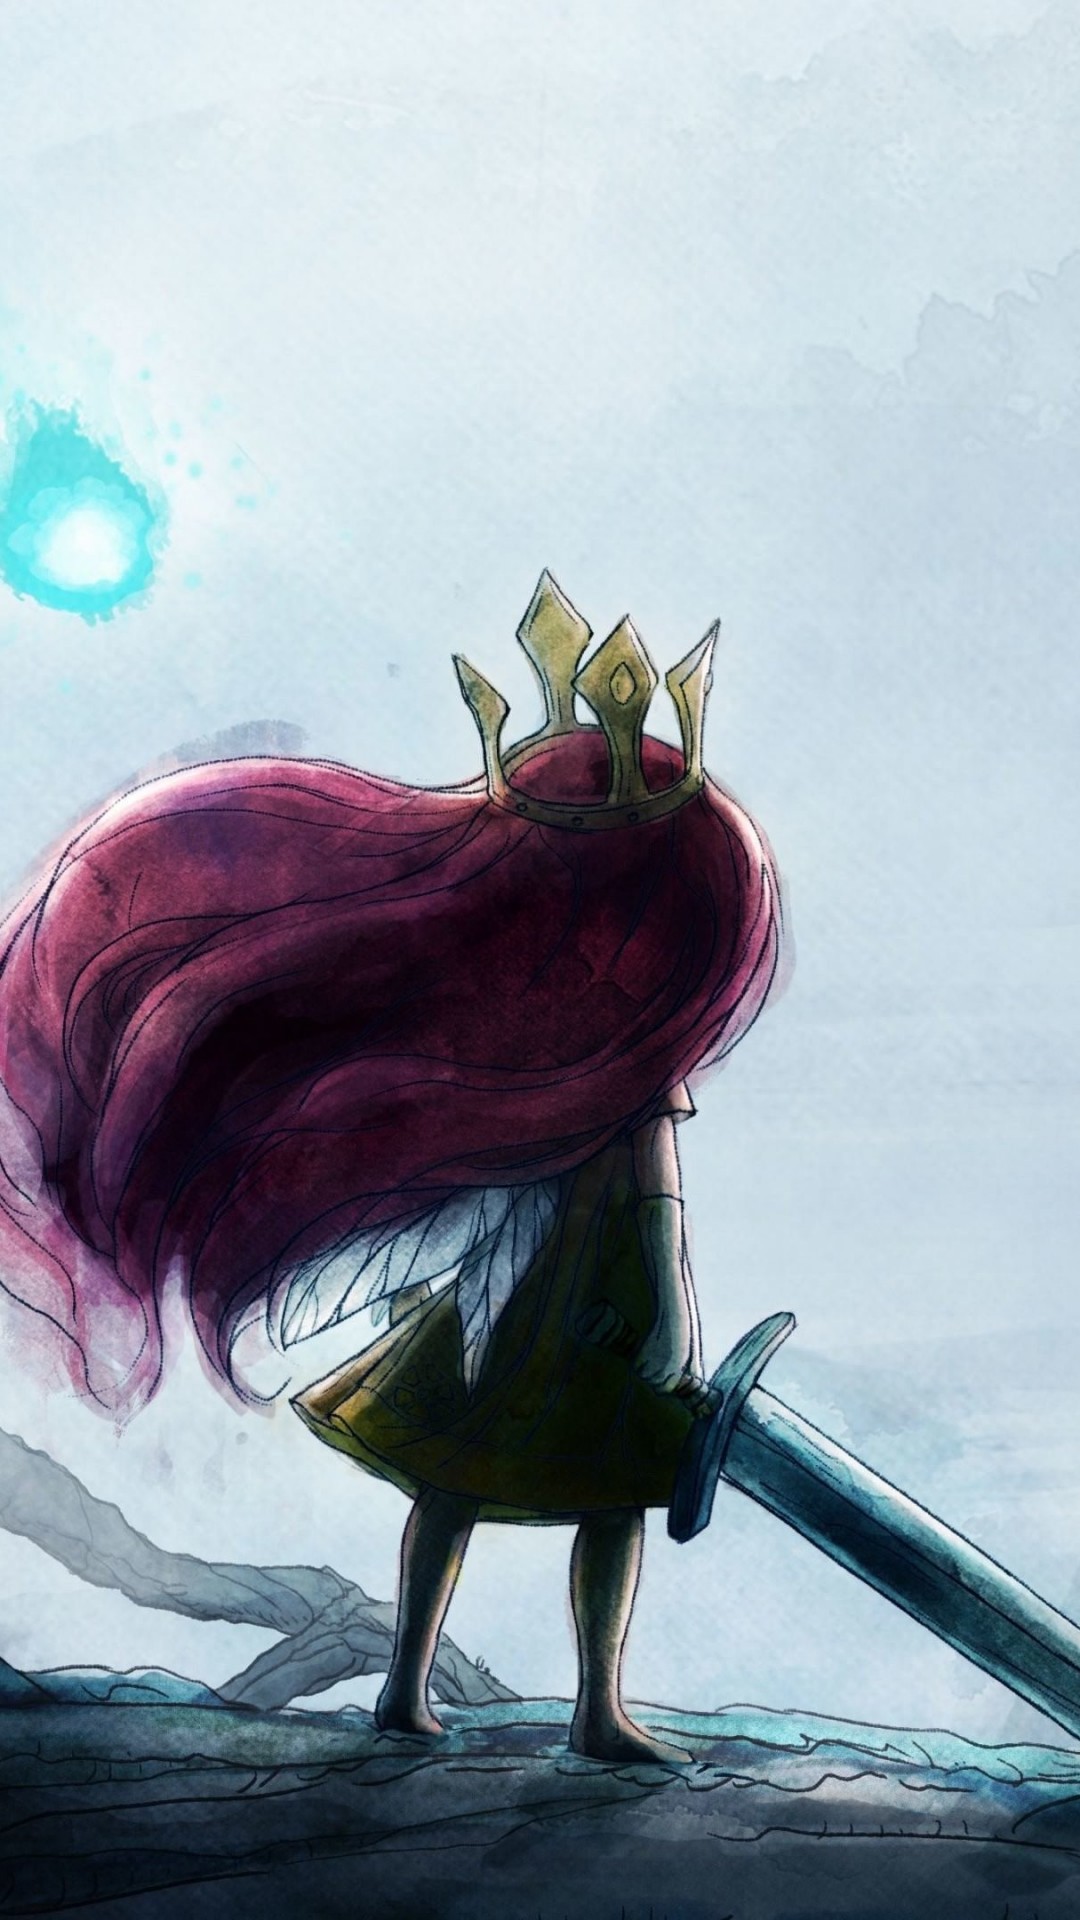 Child Of Light Wallpaper for SONY Xperia Z1